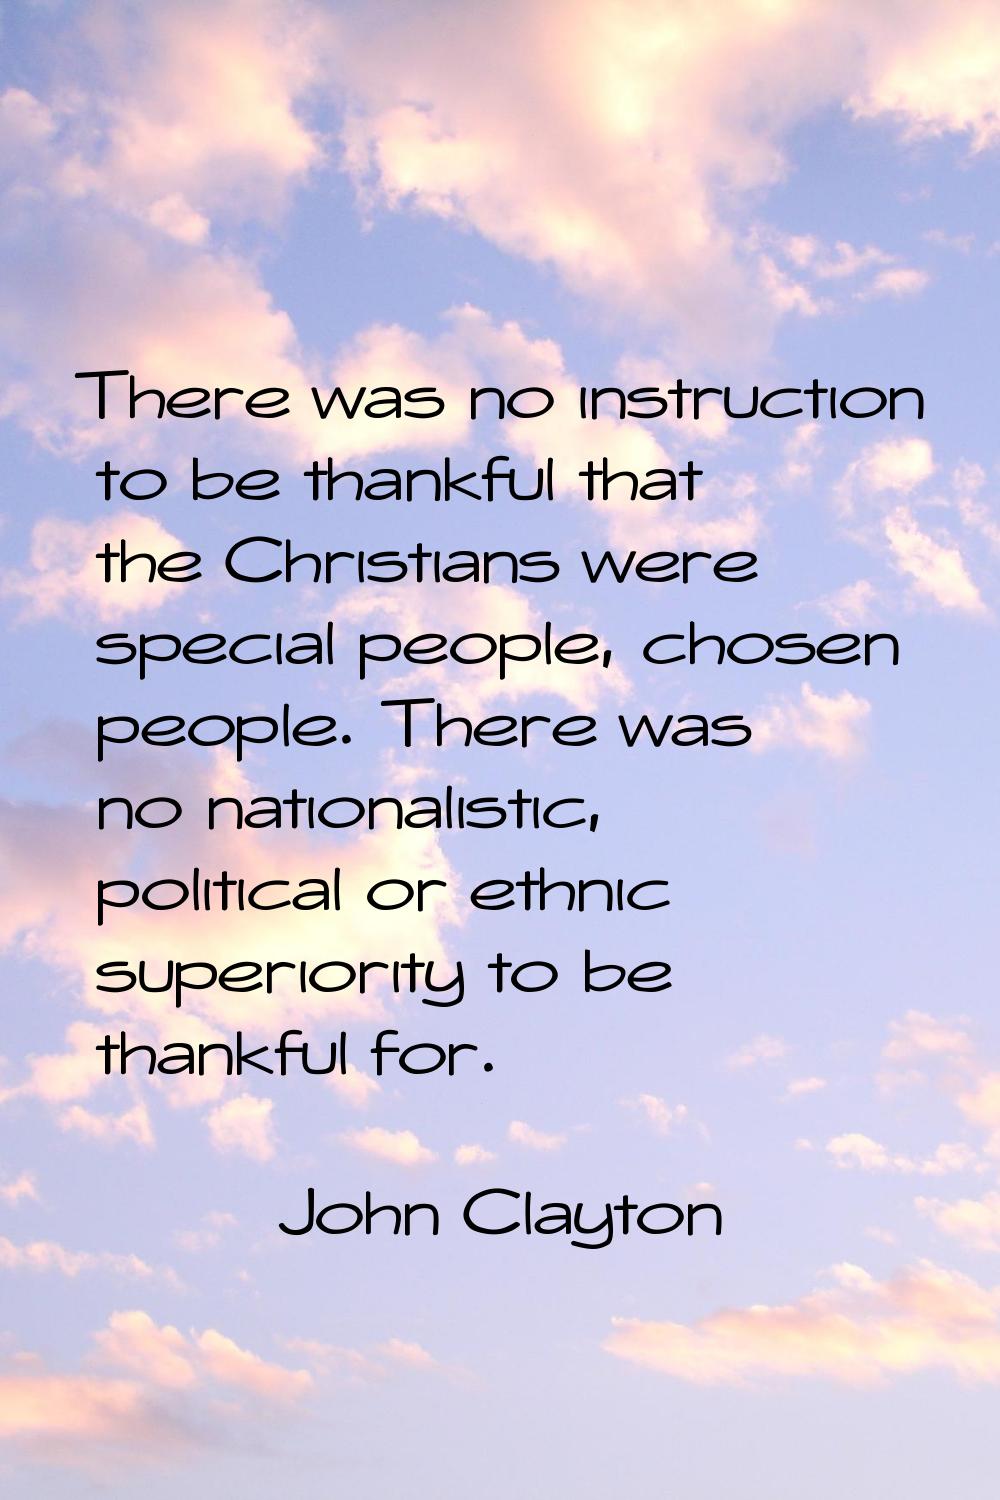 There was no instruction to be thankful that the Christians were special people, chosen people. The